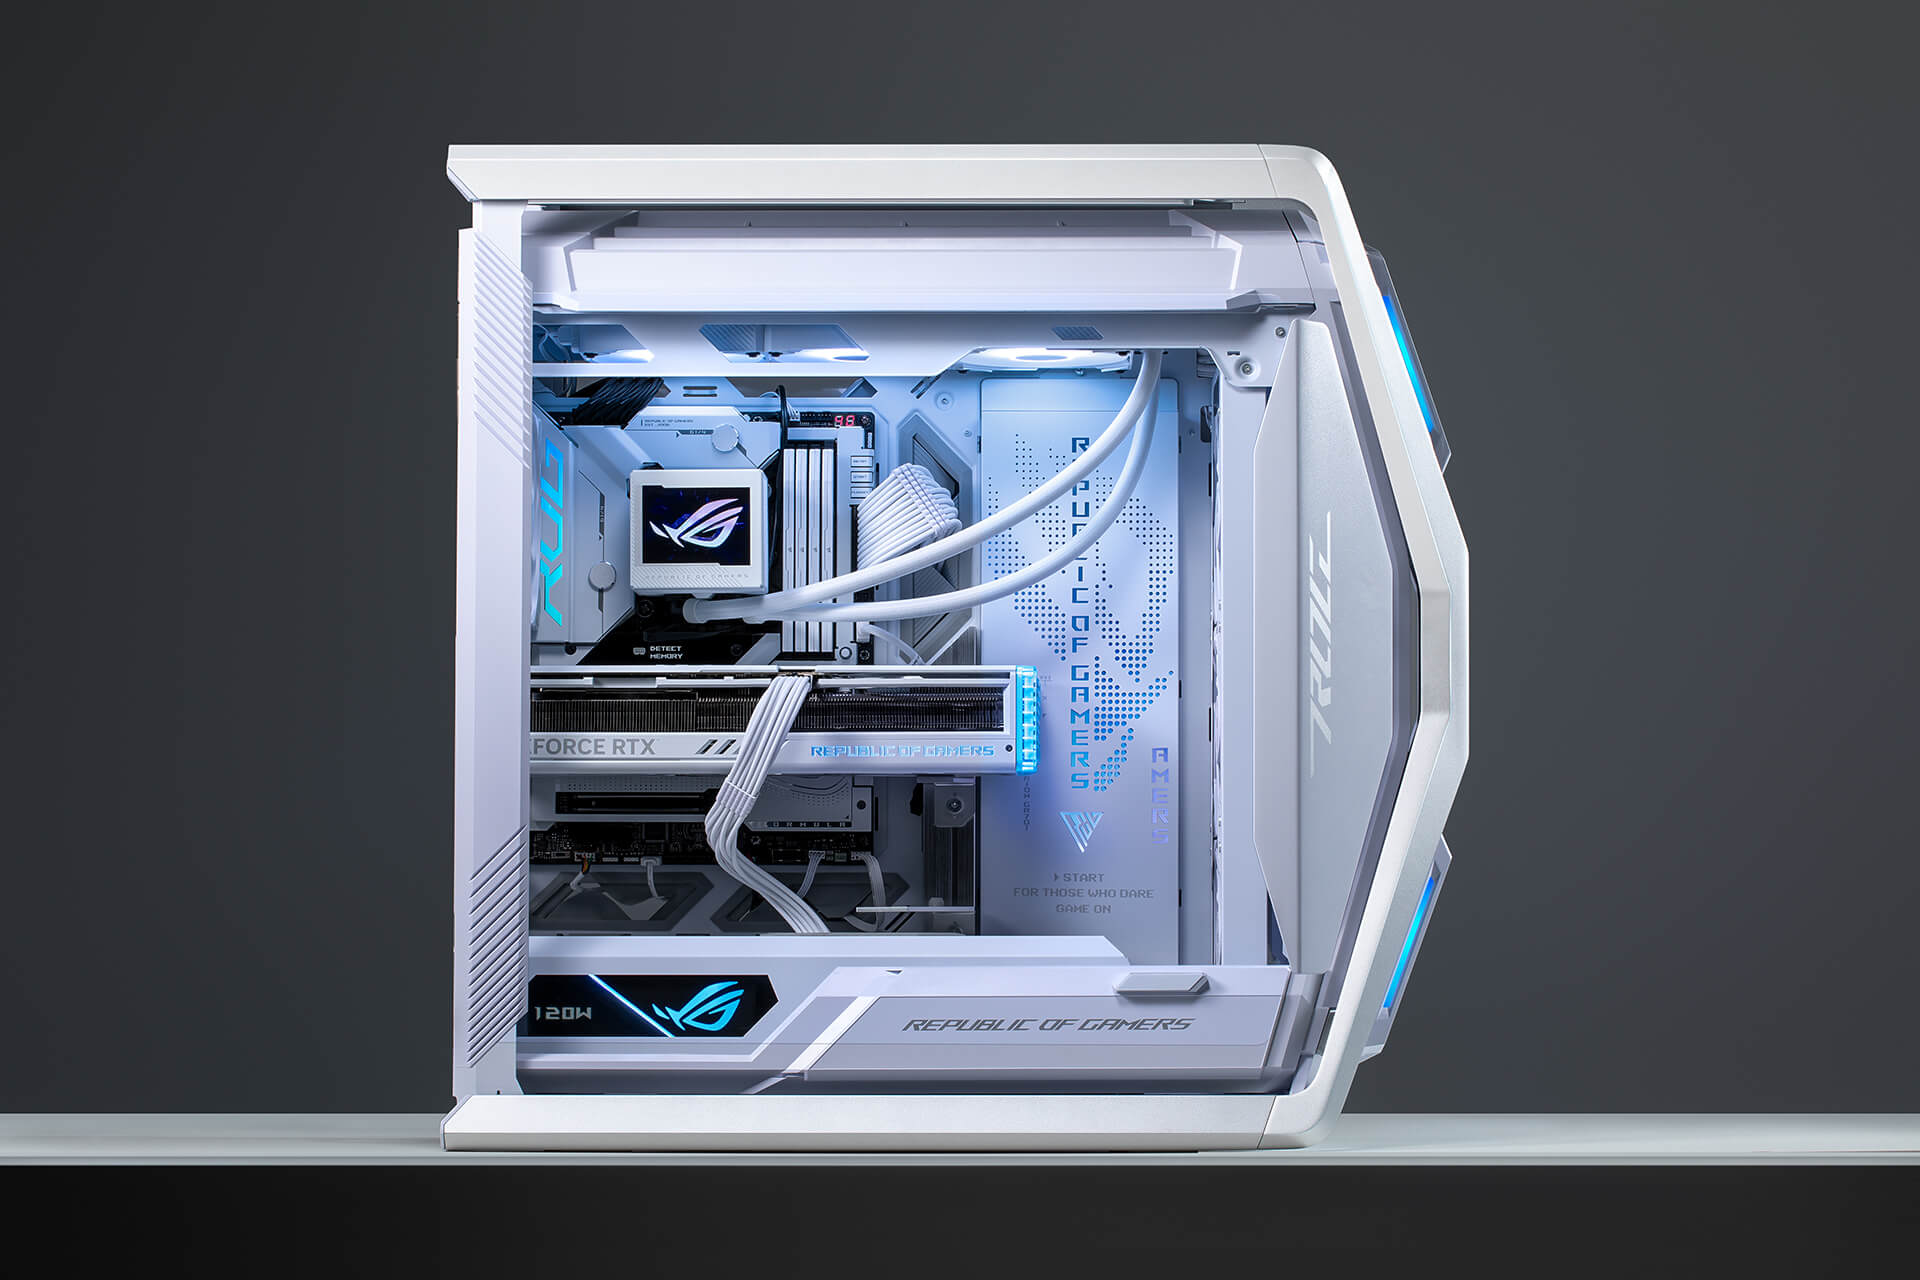 Frontal shot of the ROG Maximus Z790 Formula PC Build with the ROG Ryujin III 360 ARGB White Edition.